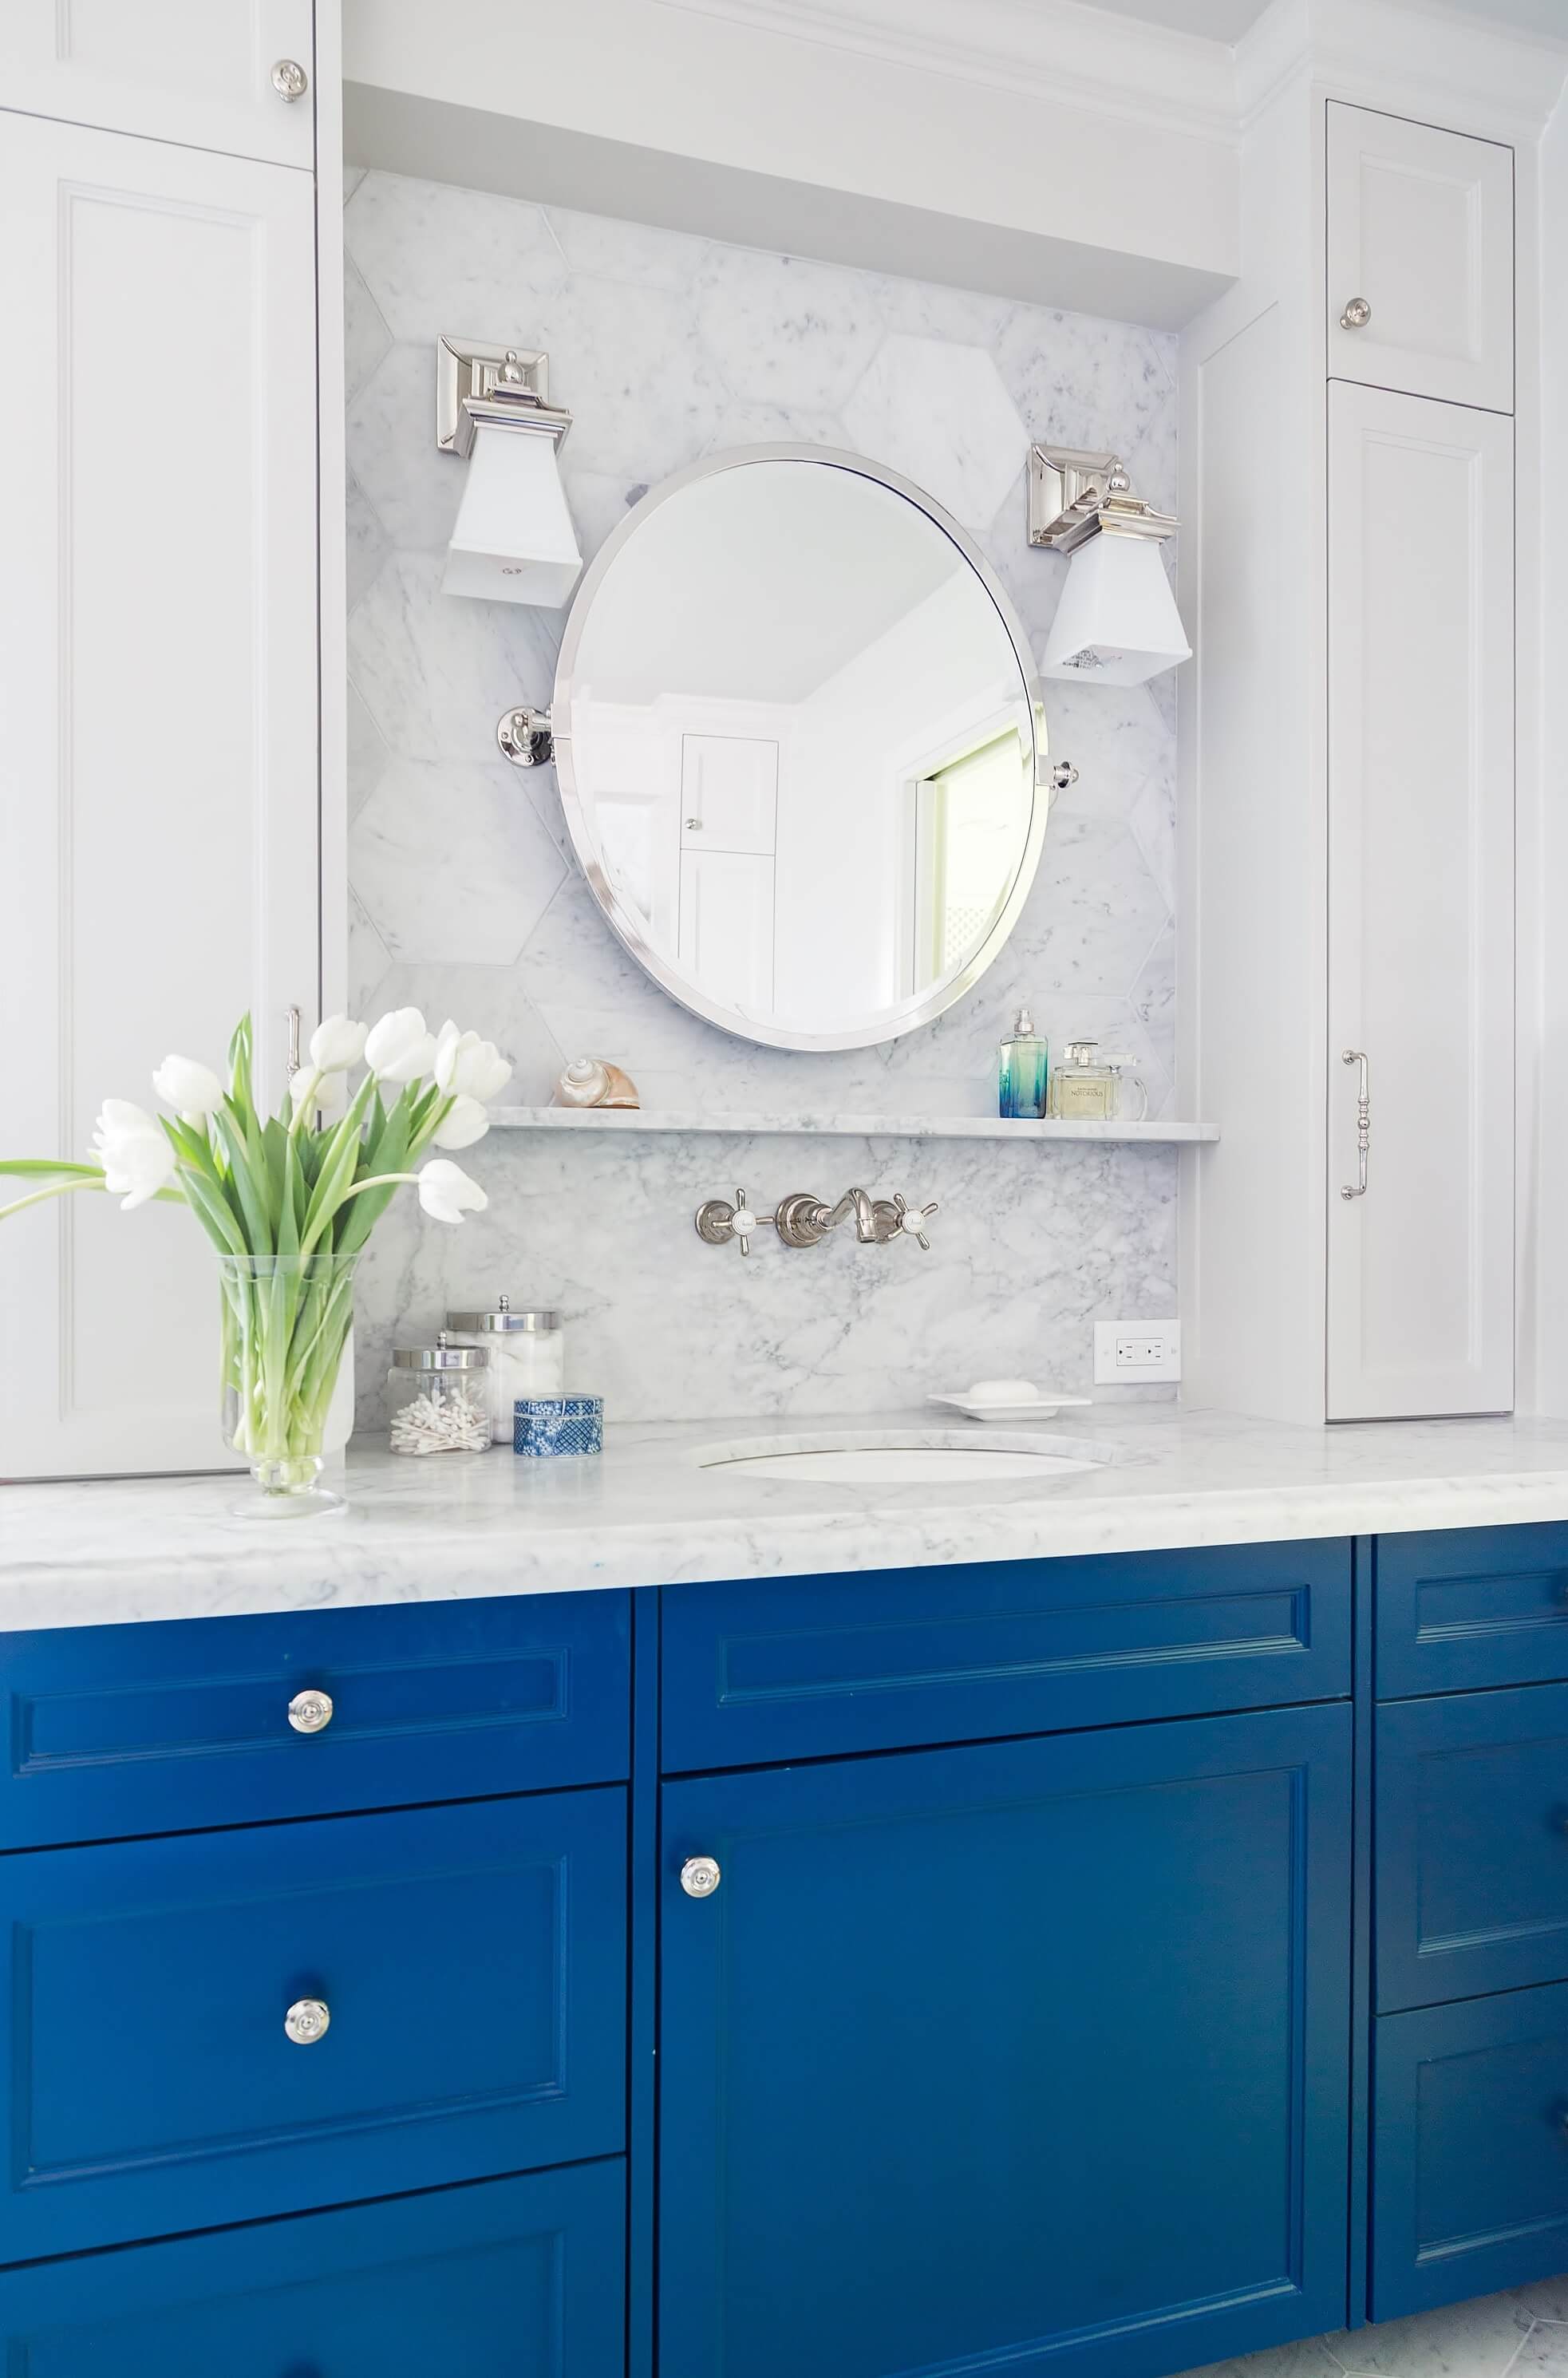 The 12 Inch Deep Upper Bathroom Cabinet Include One In Your Next